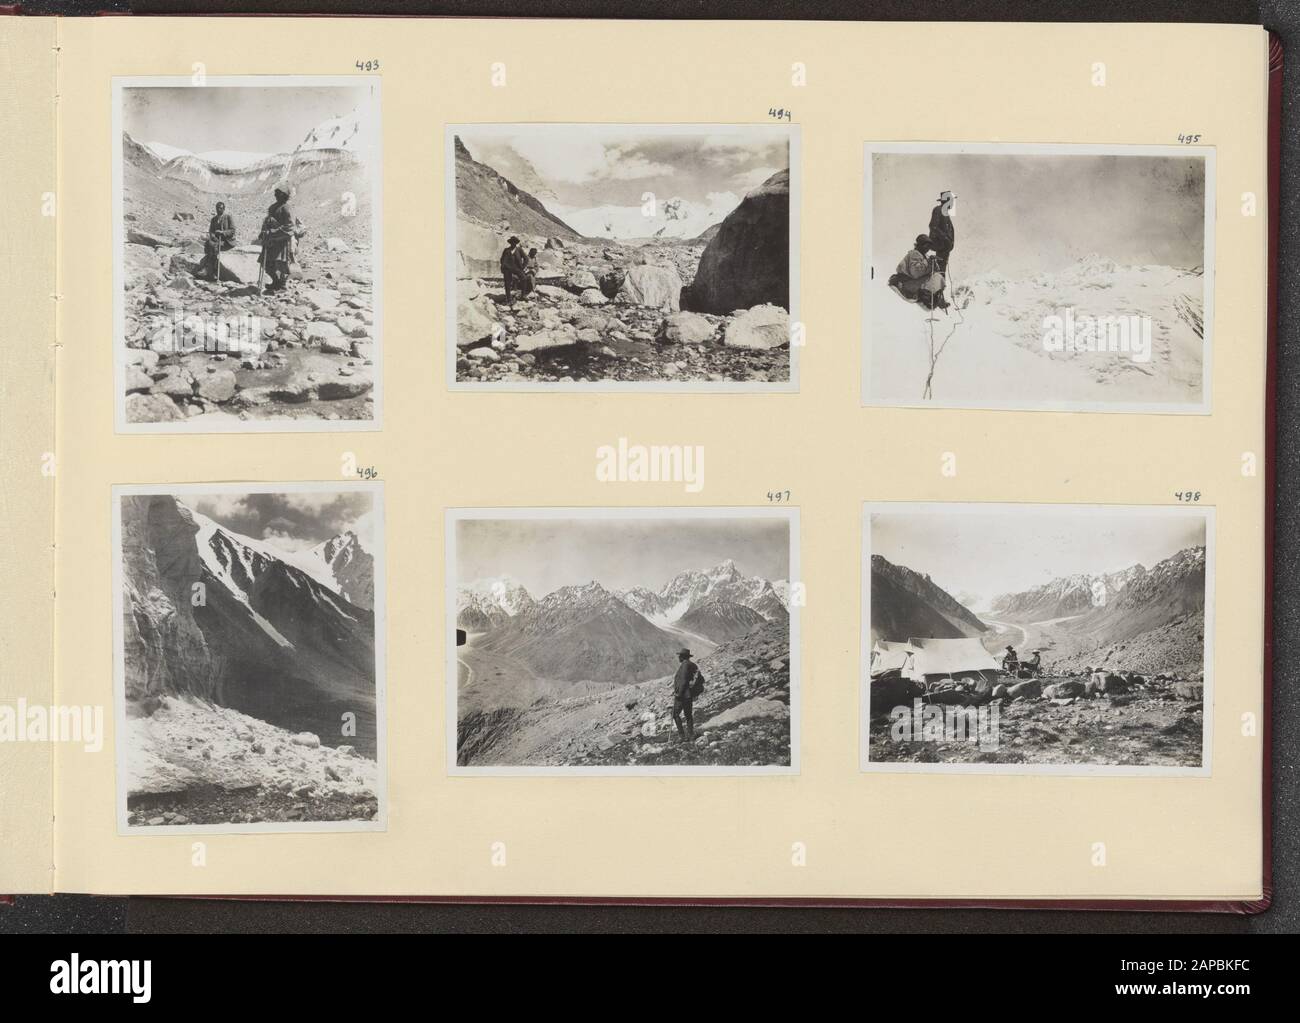 Photoalbum Fisherman: First Karakoru expedition, 1922 Description: Album sheet with six photos. Top left: Ph.C. Fisherman and a cooler at the end of the Maulong Glacier; upper centre: the Maulong Glacier; upper right: Ph.C. Fisherman and a cooler for the three highest peaks of the Sasir group; lower left: a field of edelweiss; lower middle: the K32 with the Mungistang glacier; lower right: camp in the Lashi valley with in the background the K32 Date: 1922/07/19 Location: India, Karakorum, Pakistan Keywords: mountains, flowers, glaciers, tents Personal name: Fisherman, Ph.C. Stock Photo